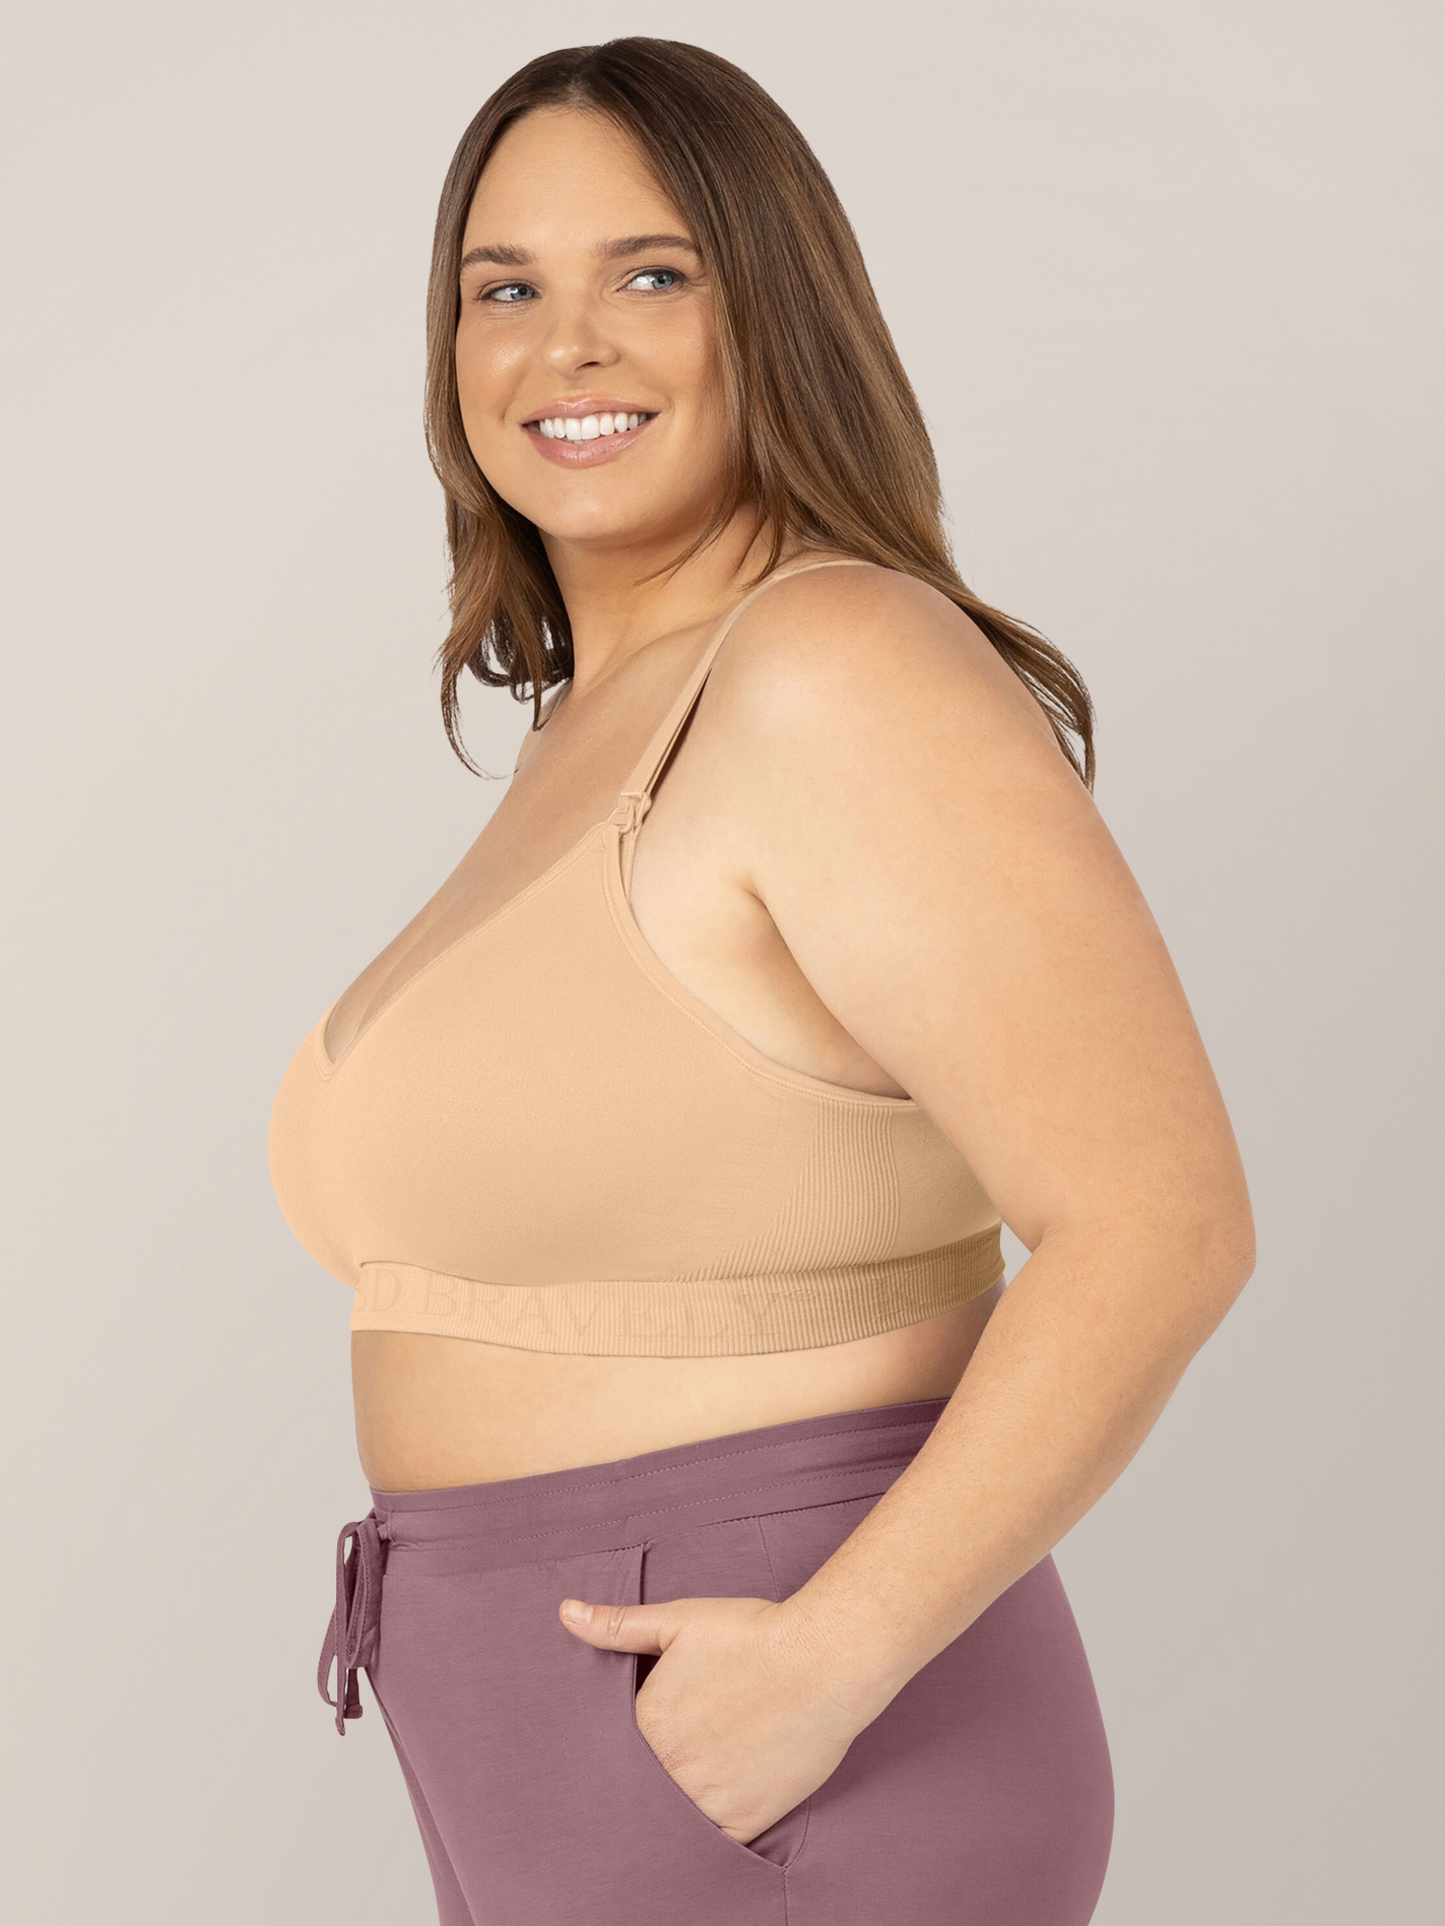 Model wearing the Signature Sublime® Contour Maternity & Nursing Bra in Beige with her hands in her pockets.